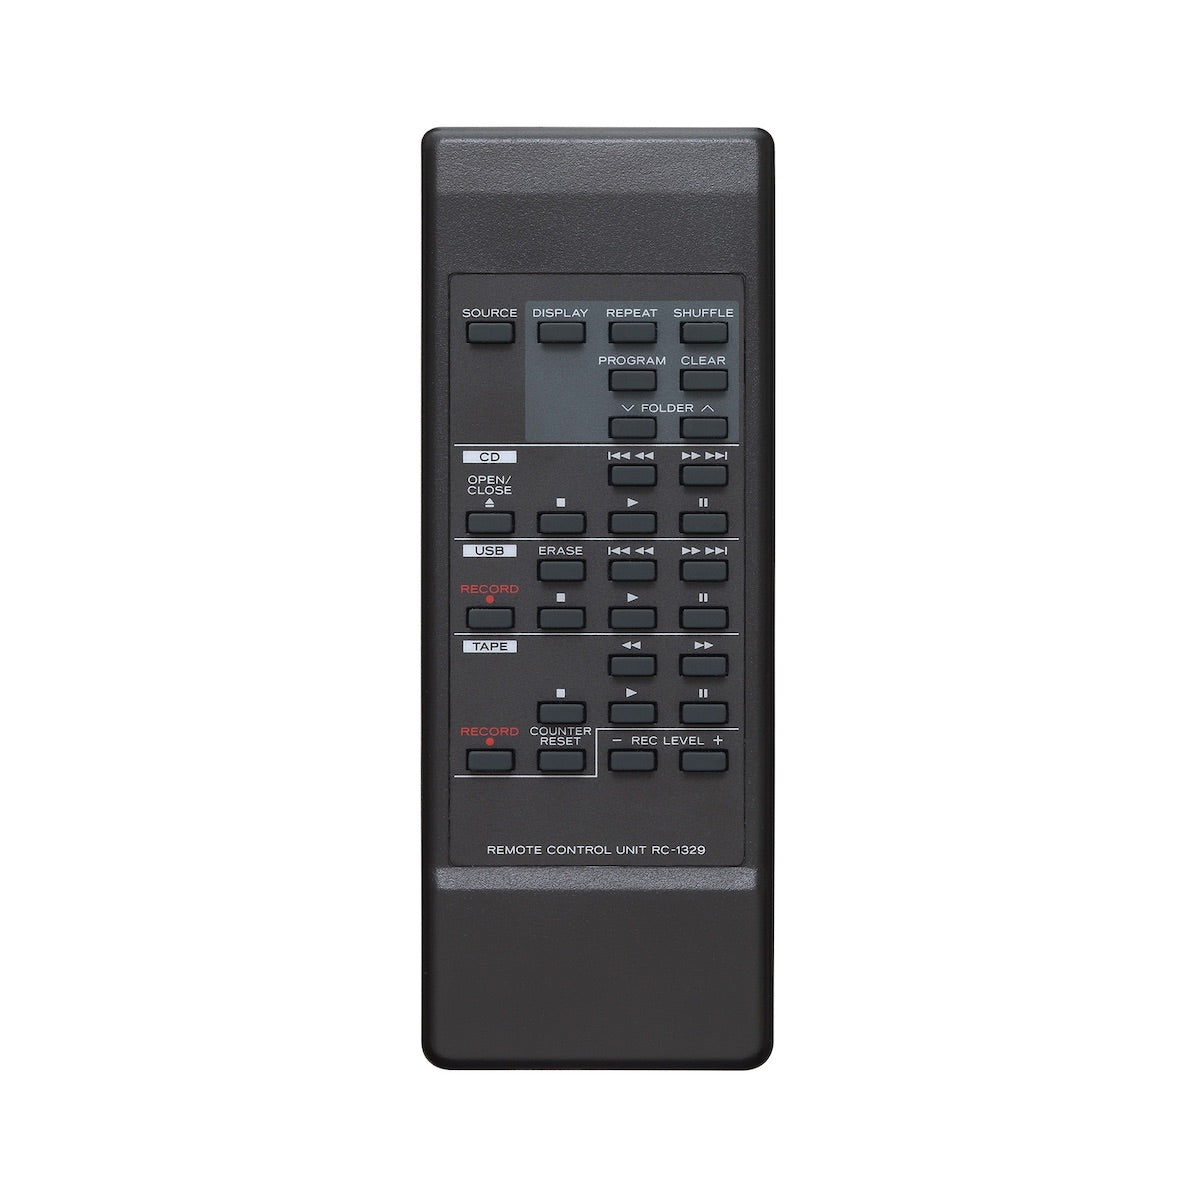 Tascam CD-A580 - Cassette Recorder, CD Player, USB Flash Drive Recorder